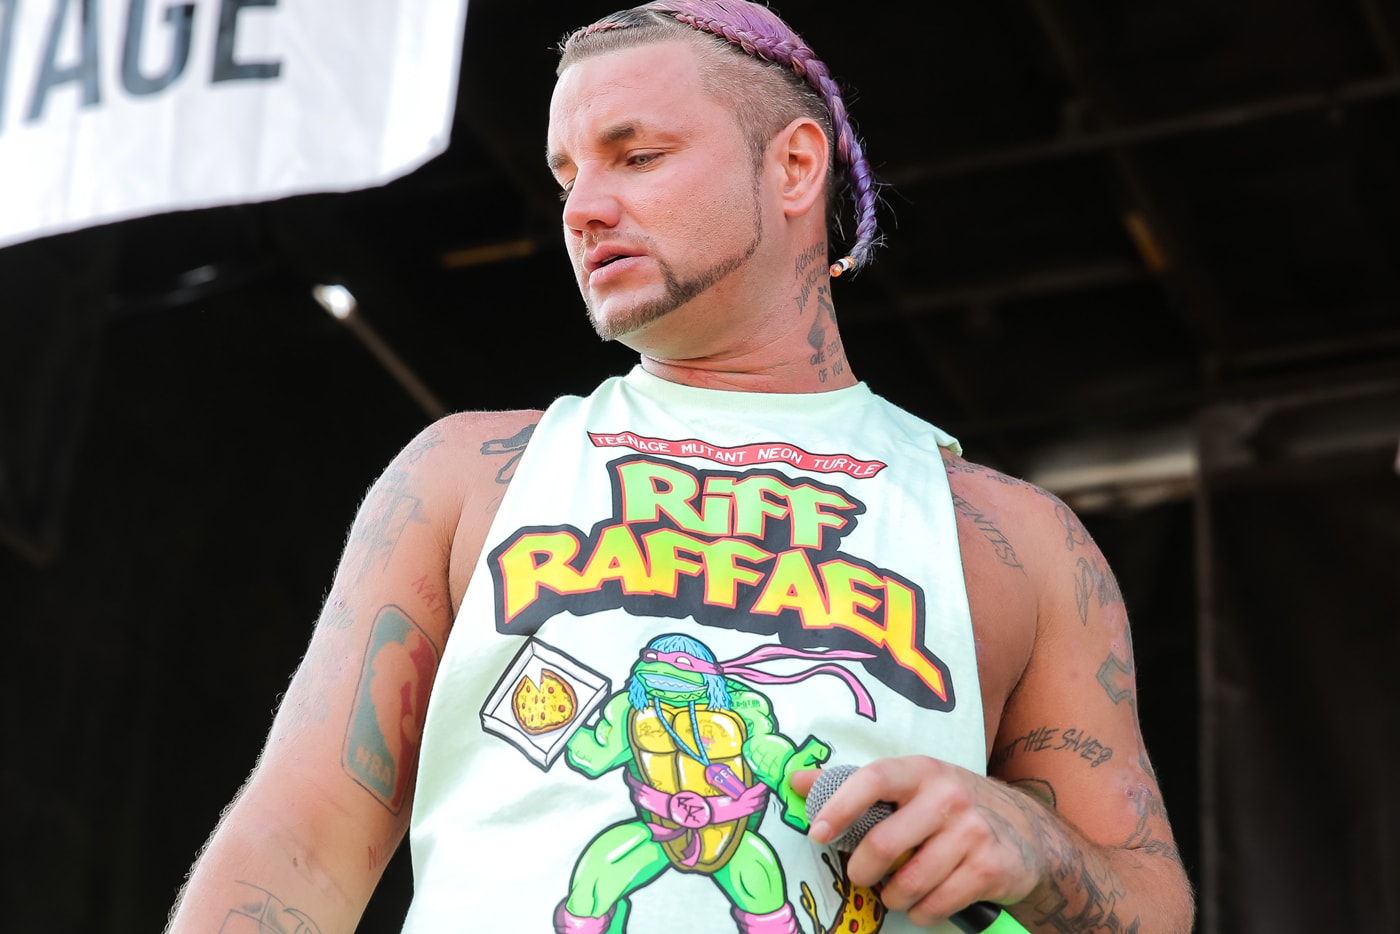 riff-raff-is-recruiting-people-for-his-new-country-music-band